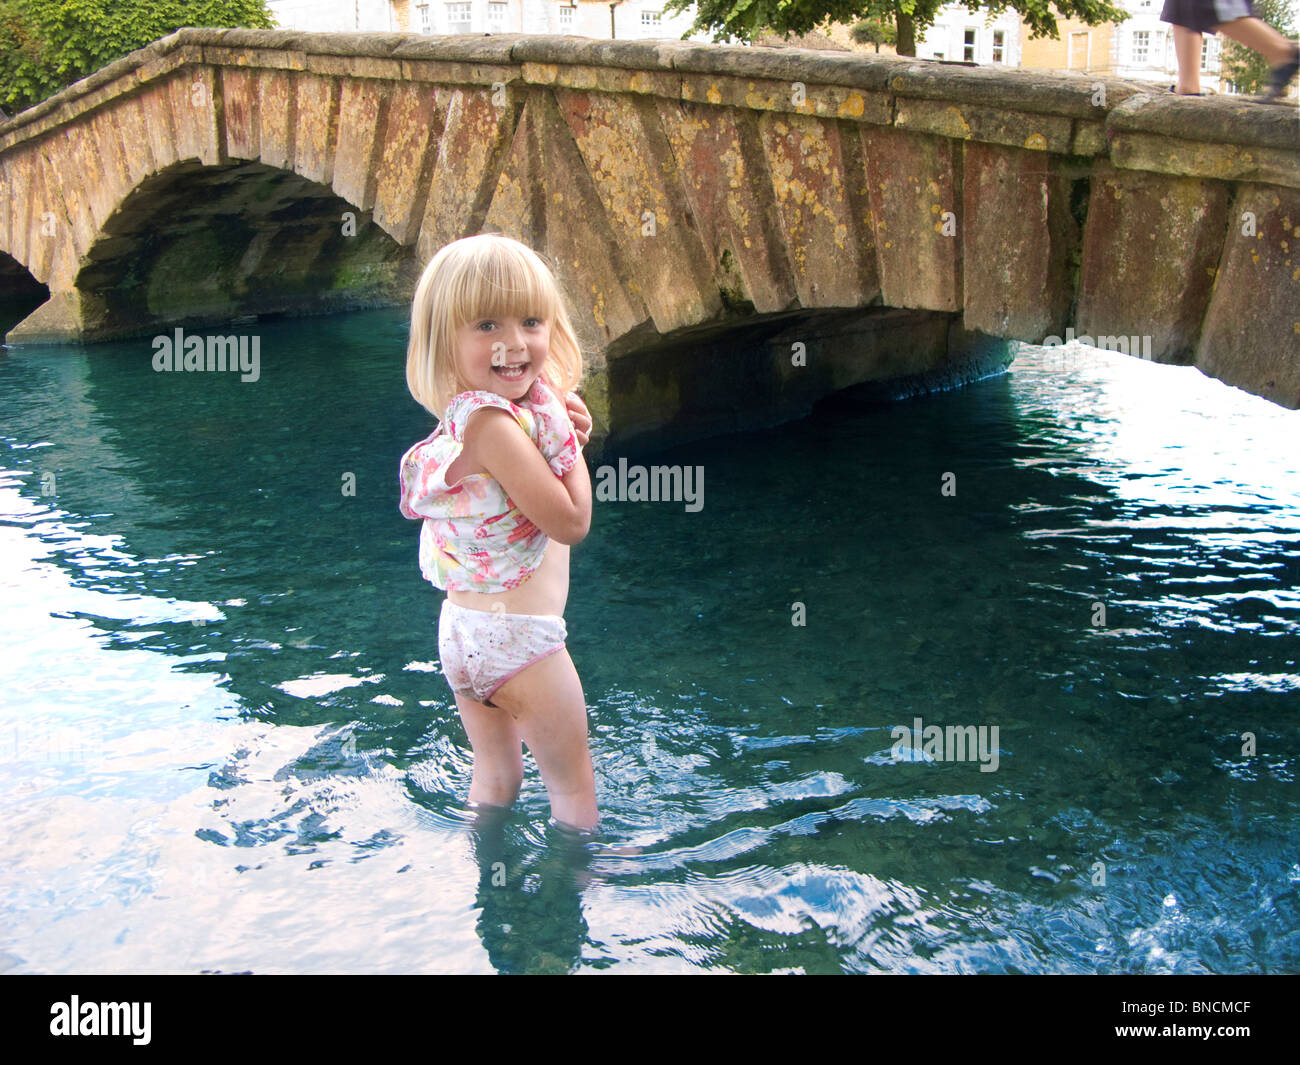 A little girl paddling in a stream. Bourton on the Water, The Cotswolds, England. Stock Photo